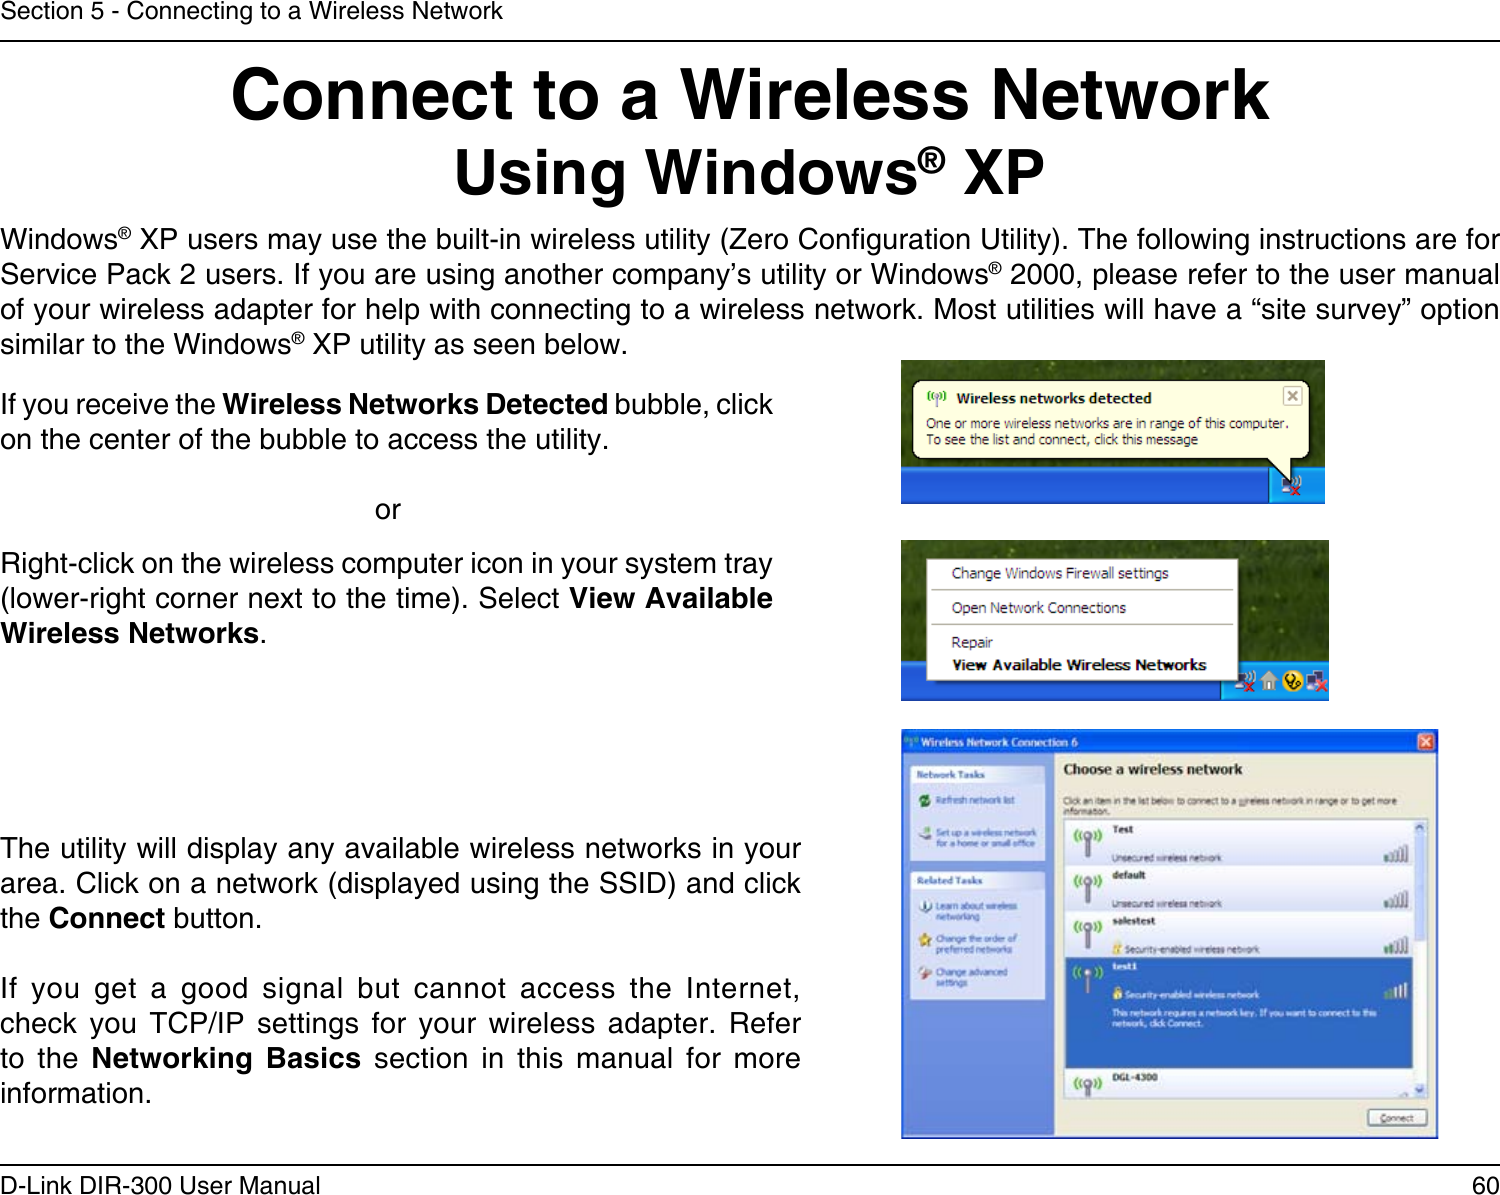 60D-Link DIR-300 User ManualSection 5 - Connecting to a Wireless NetworkConnect to a Wireless NetworkUsing Windows® XPWindows® XP users may use the built-in wireless utility (Zero Conguration Utility). The following instructions are for Service Pack 2 users. If you are using another company’s utility or Windows® 2000, please refer to the user manual of your wireless adapter for help with connecting to a wireless network. Most utilities will have a “site survey” option similar to the Windows® XP utility as seen below.Right-click on the wireless computer icon in your system tray (lower-right corner next to the time). Select View Available Wireless Networks.If you receive the Wireless Networks Detected bubble, click on the center of the bubble to access the utility.     orThe utility will display any available wireless networks in your area. Click on a network (displayed using the SSID) and click the Connect button.If  you  get  a  good  signal  but  cannot  access  the  Internet, check  you  TCP/IP  settings  for  your  wireless  adapter.  Refer to  the  Networking  Basics  section  in  this  manual  for  more information.